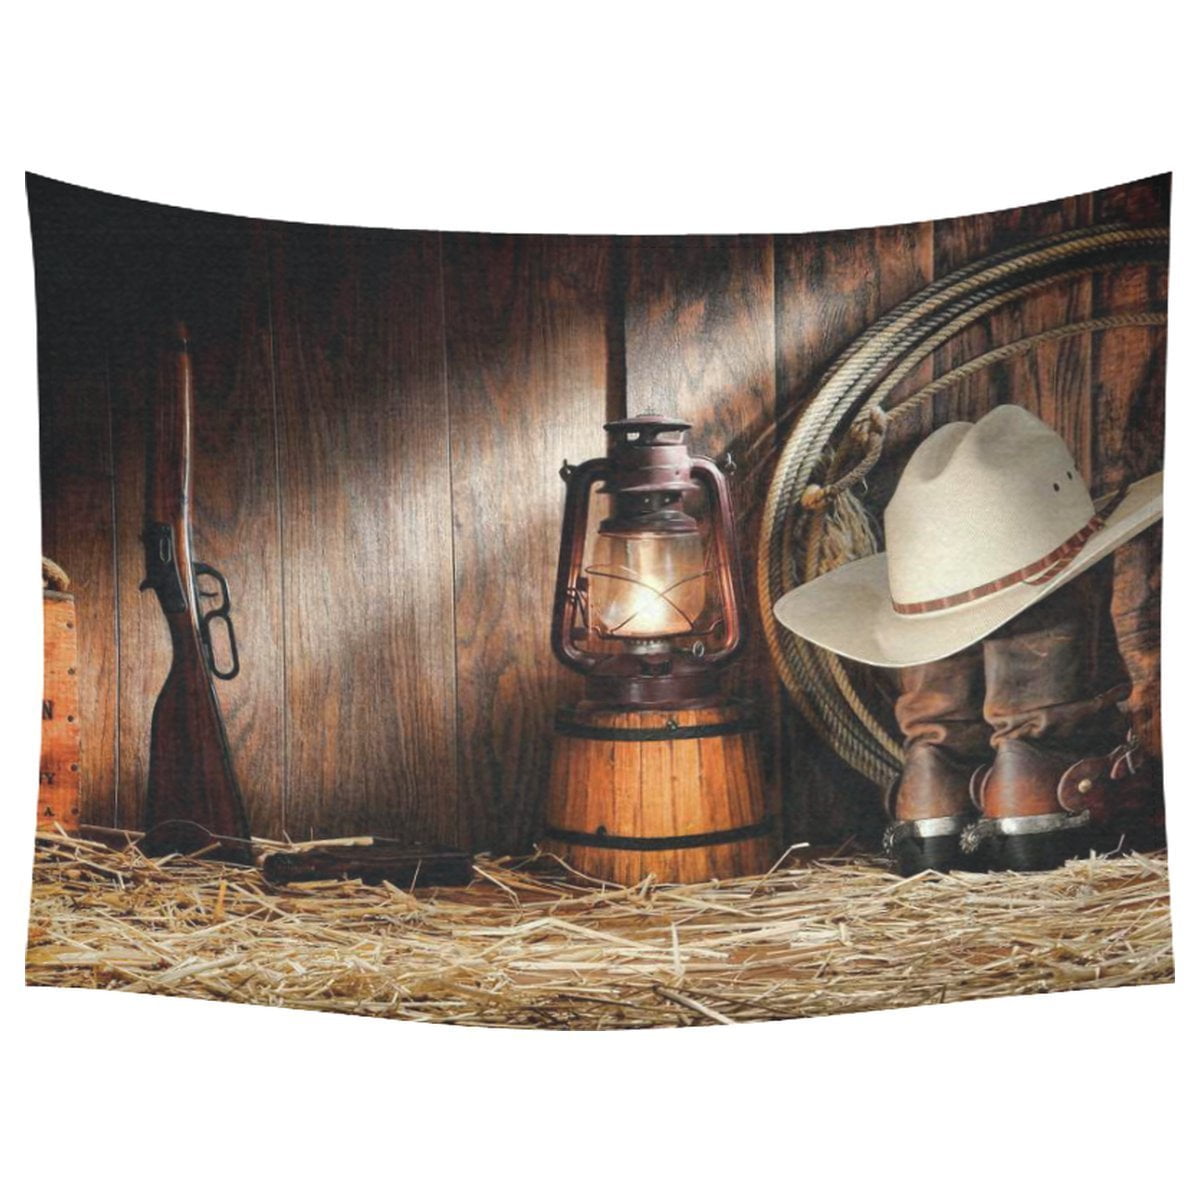 PHFZK American West Rodeo Cowboy Home Decor Wall Art, Western Decor